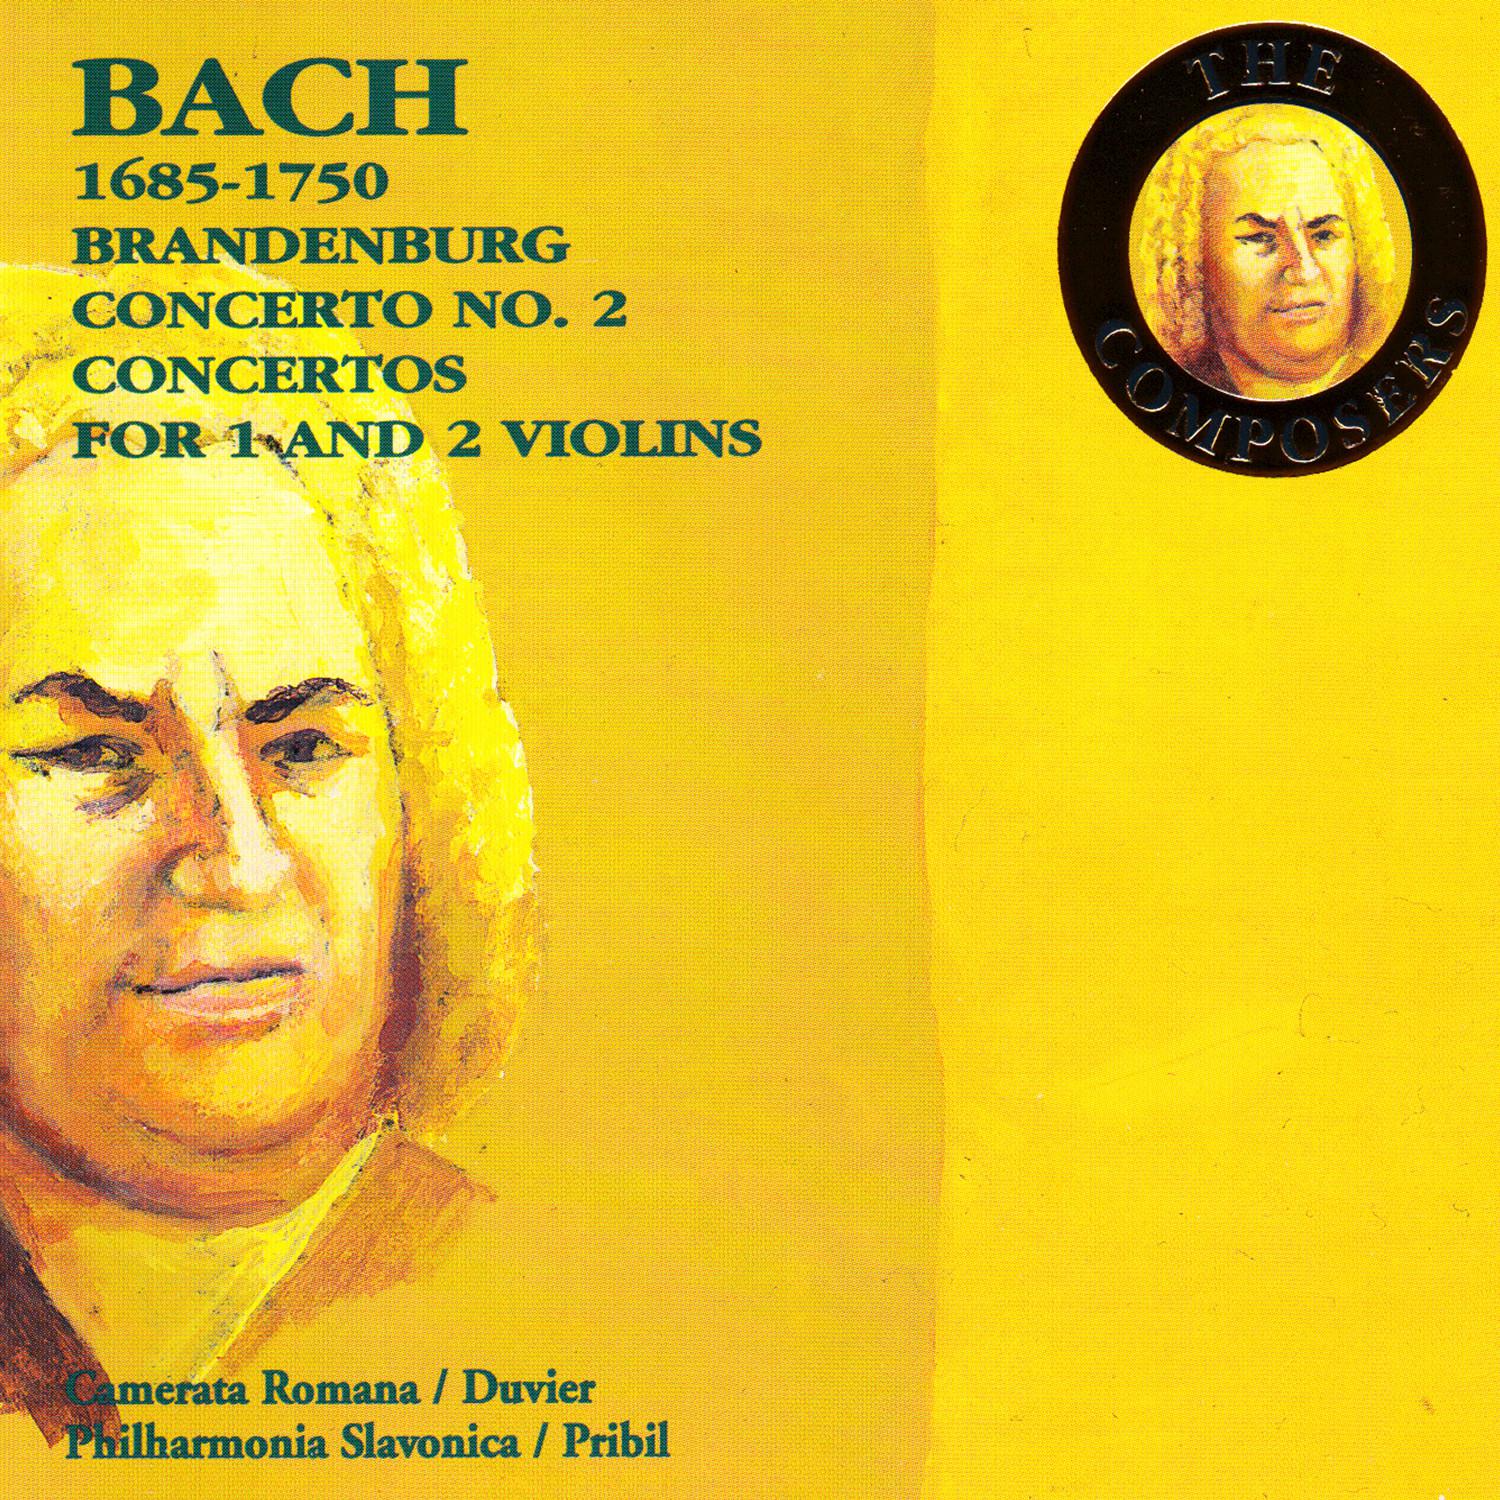 Concerto for 2 Violins, Strings and Basso Continuo in D Minor, BWV 1043: Vivace